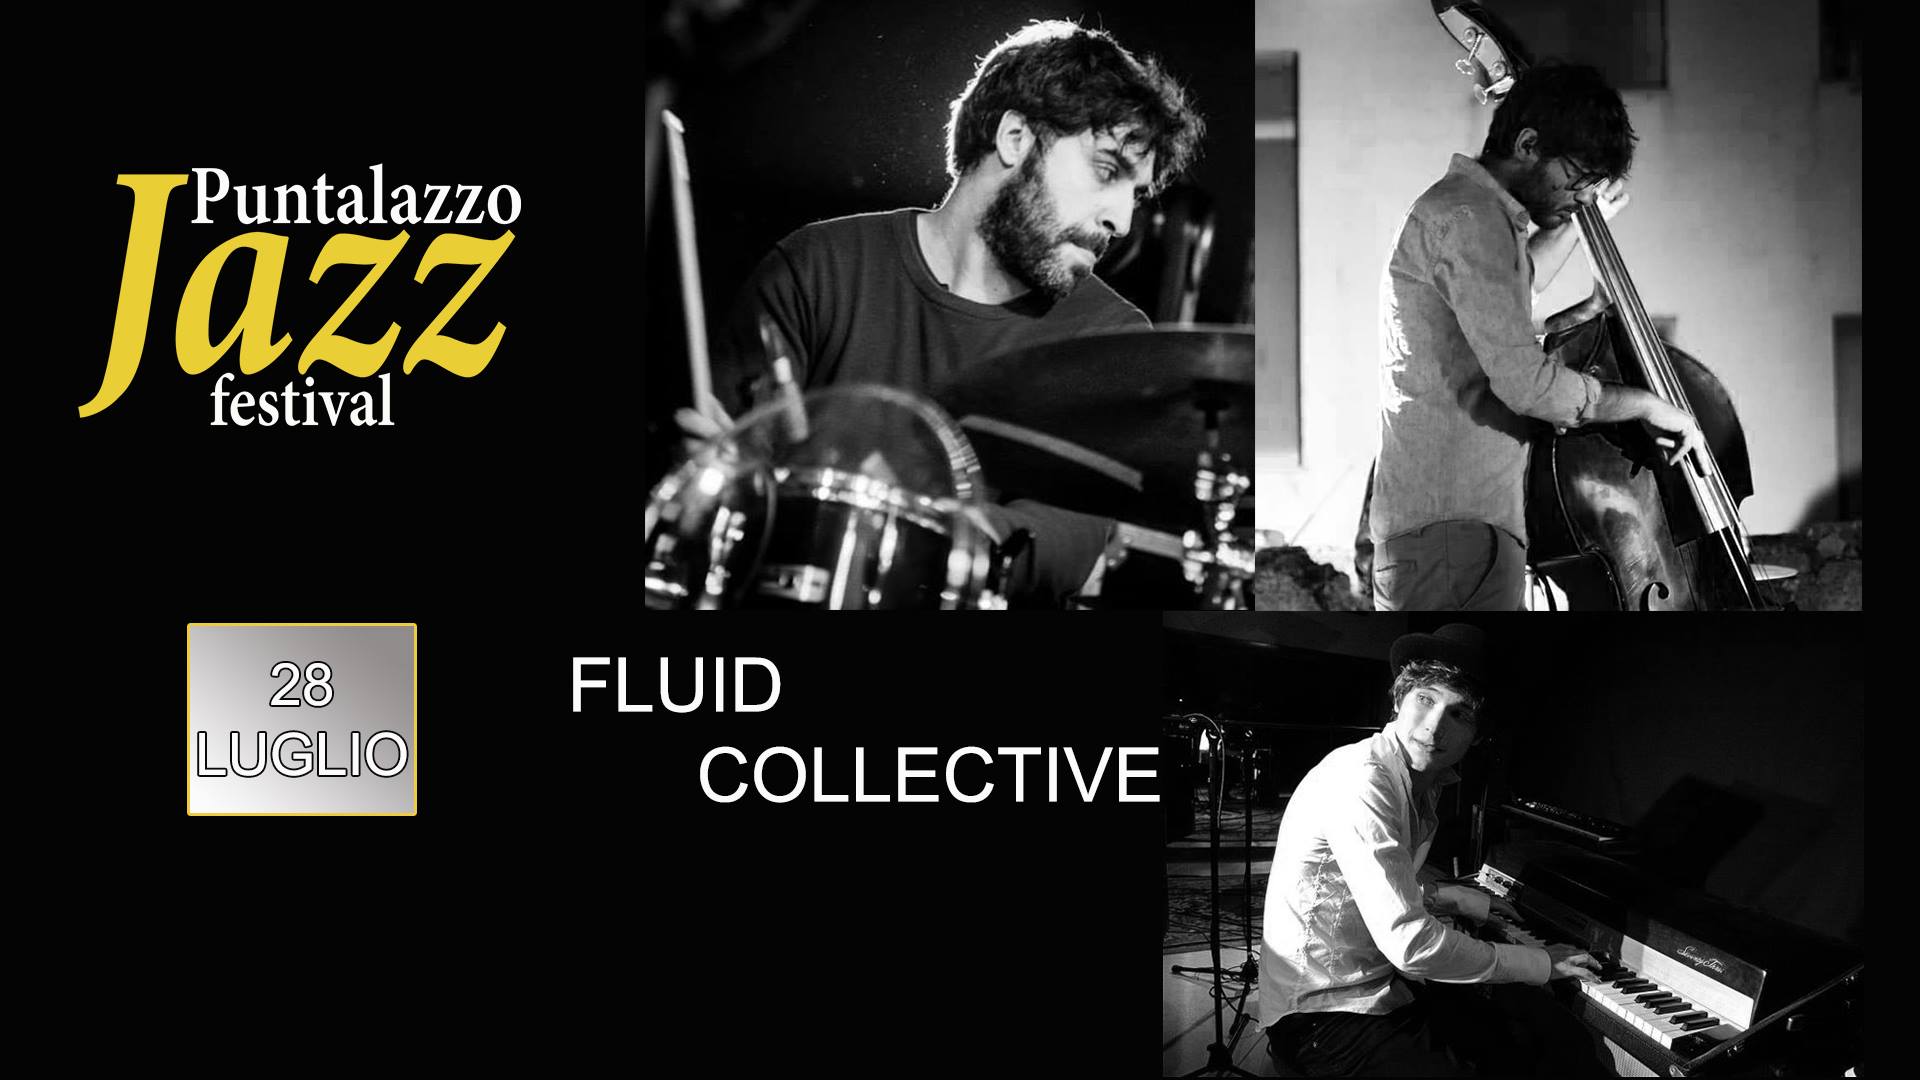 You are currently viewing Puntalazzo Jazz Festival “Fluid Collective”